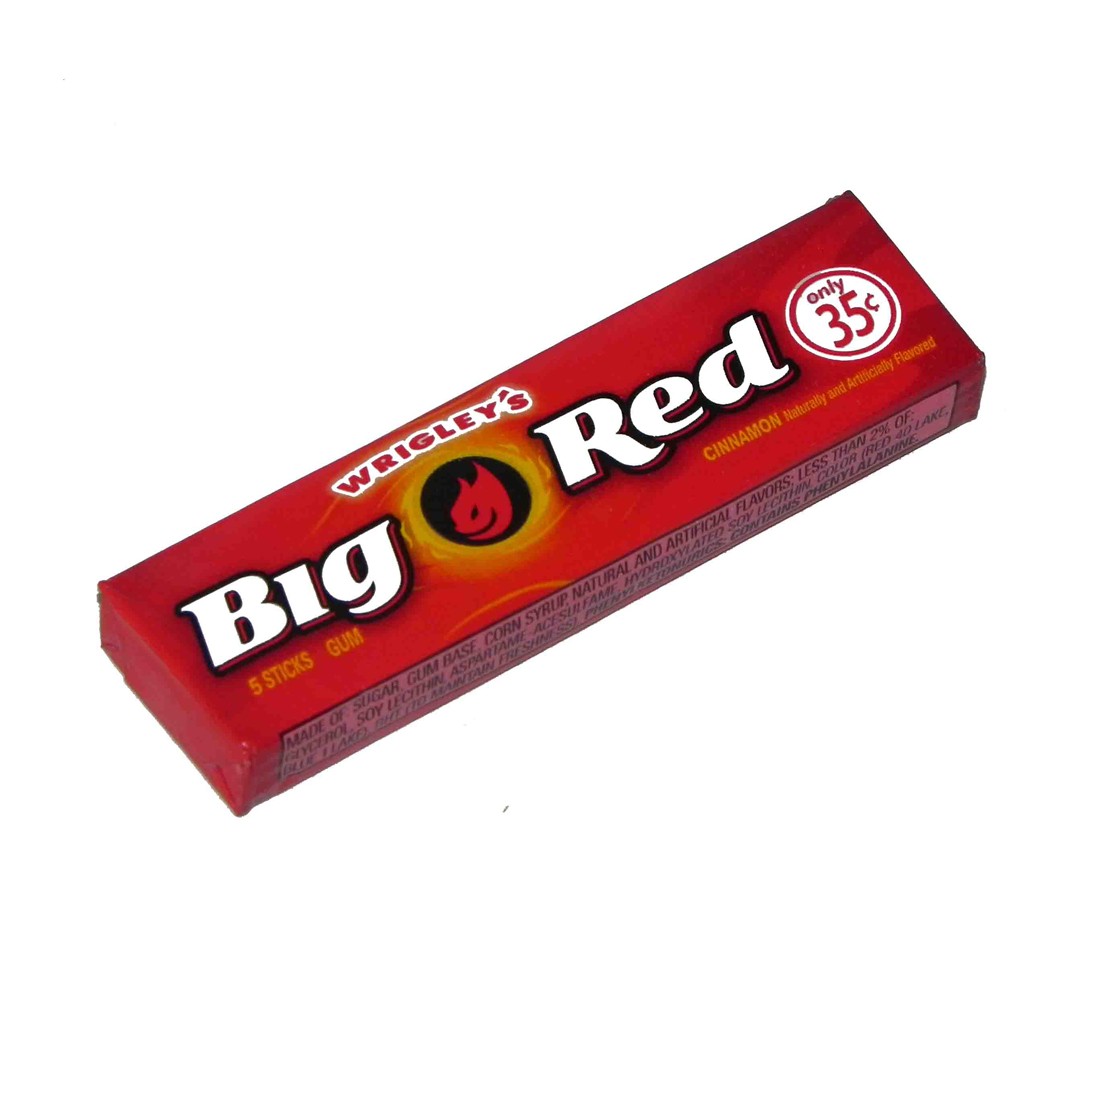 WRIGLEY'S BIG RED Cinnamon Chewing Gum, 15 pieces